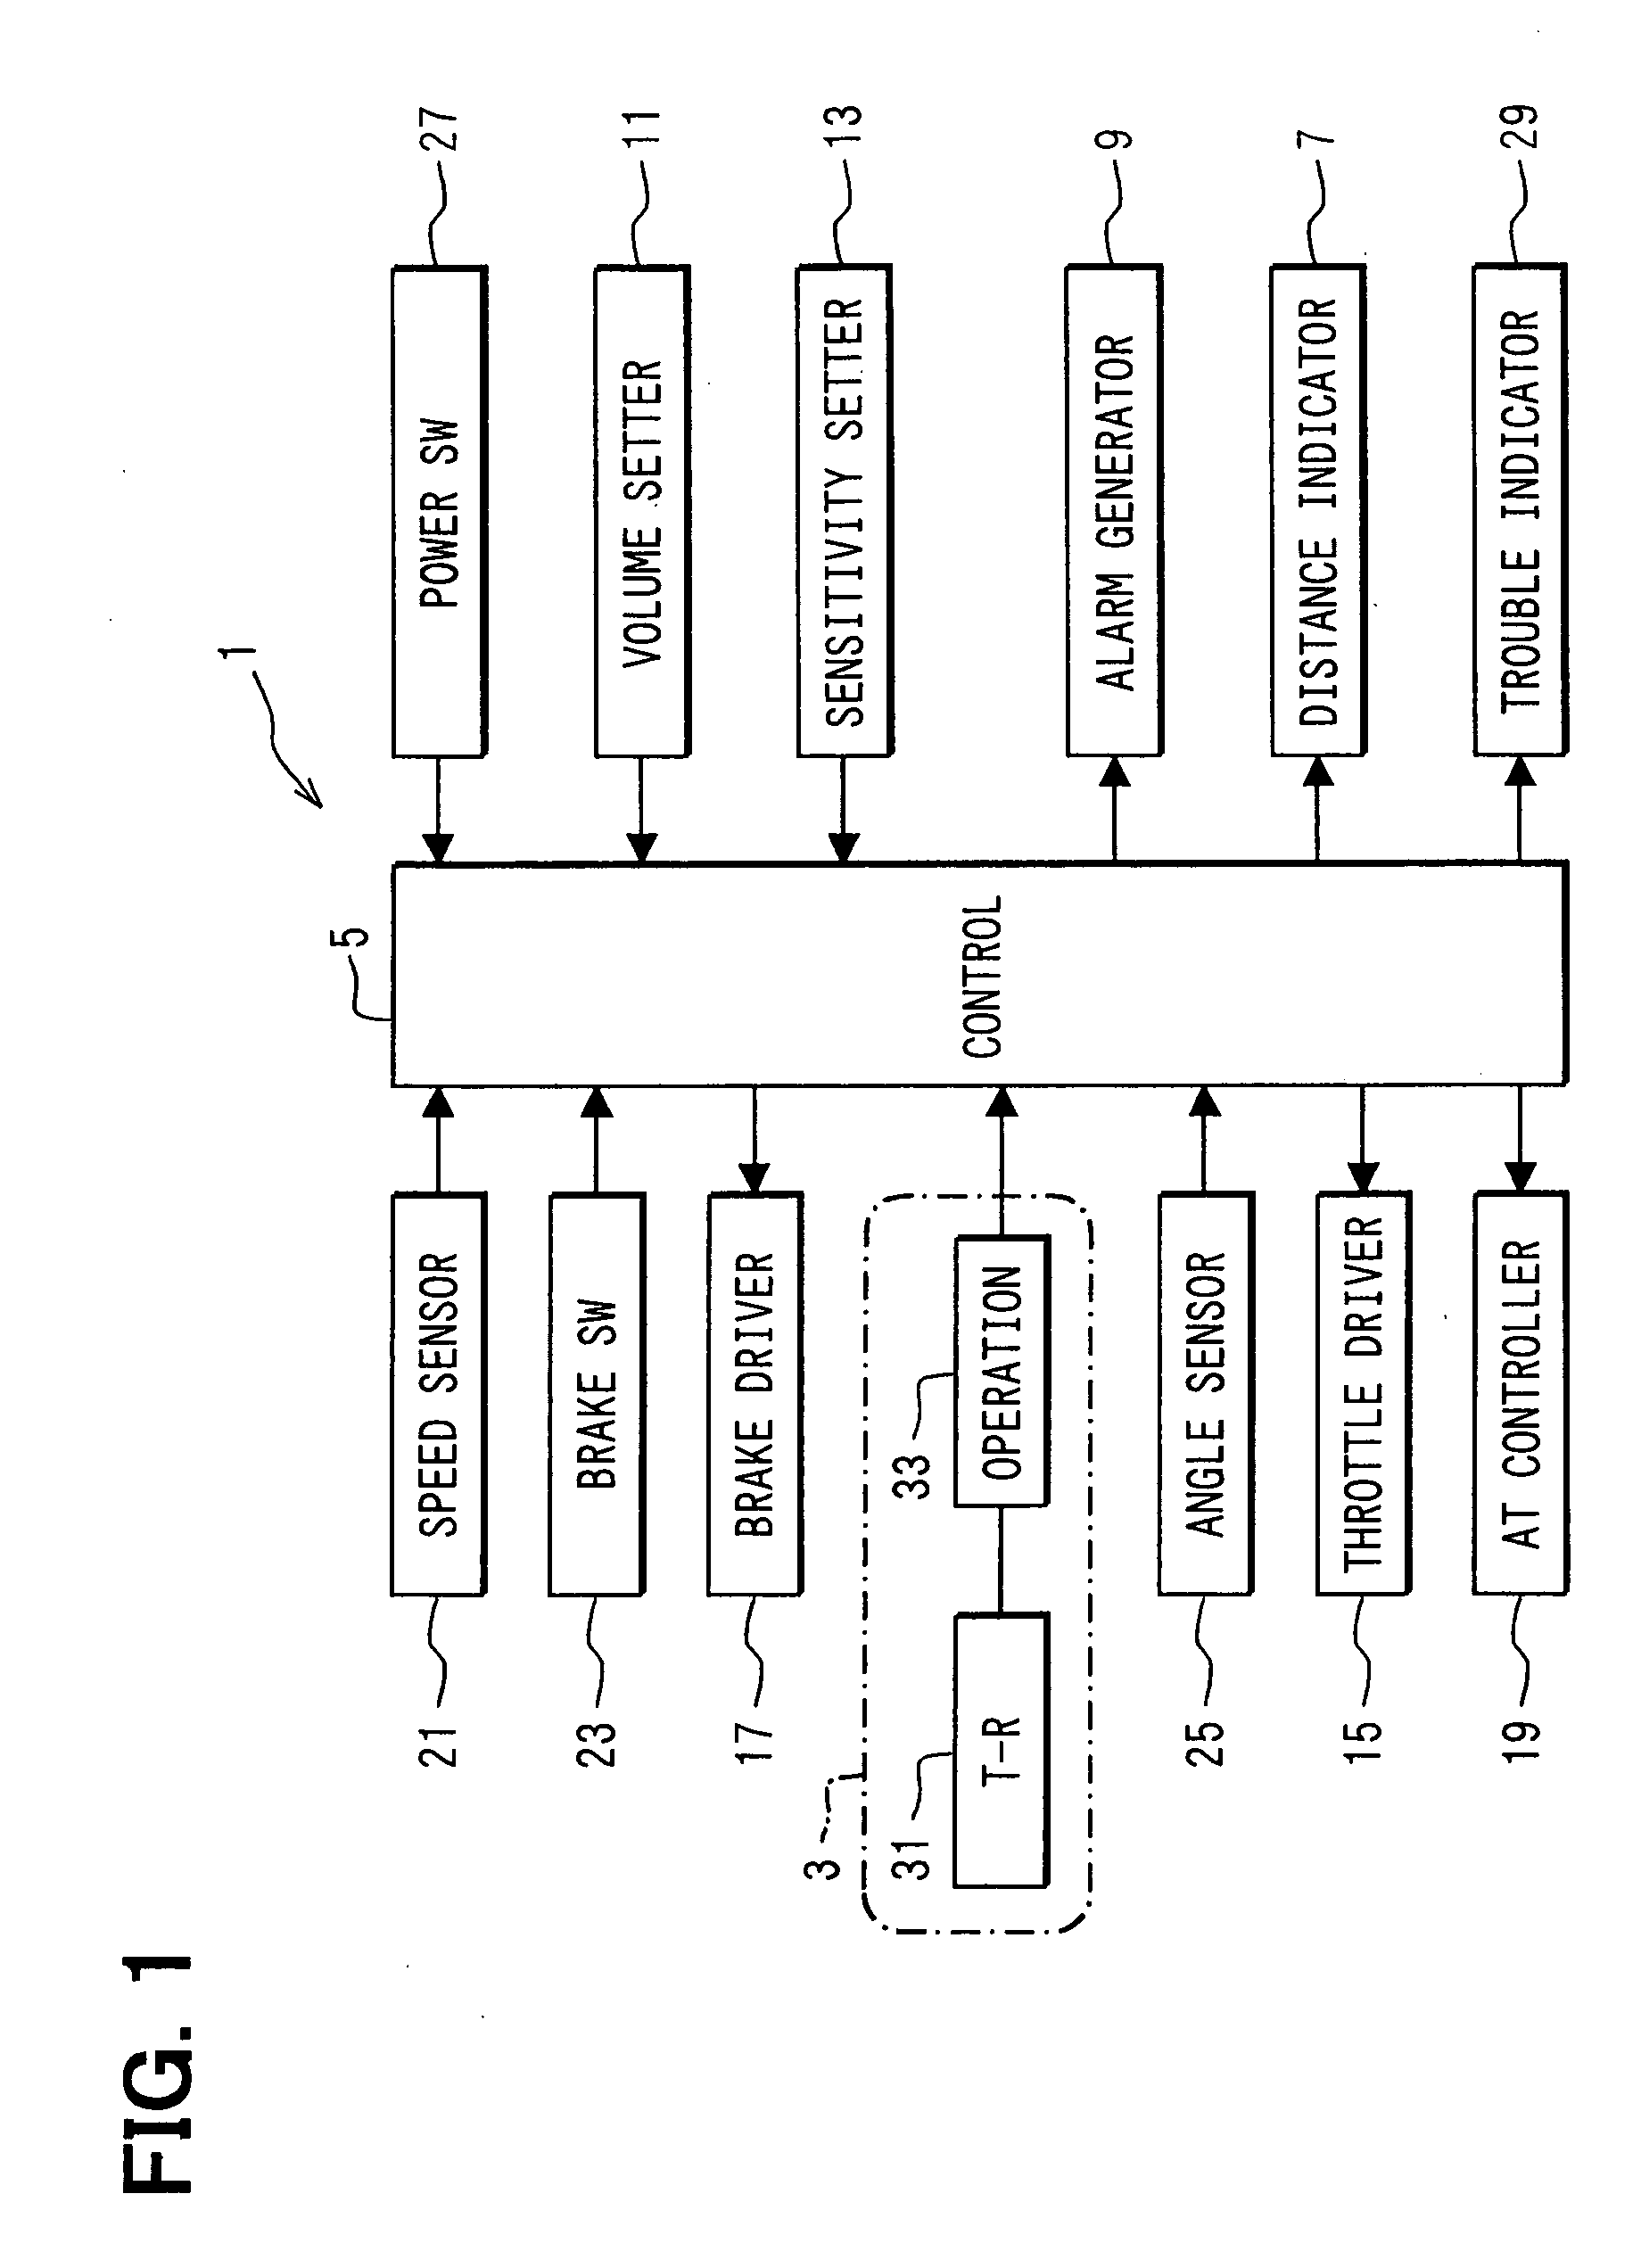 Method for detecting an obstacle around a vehicle